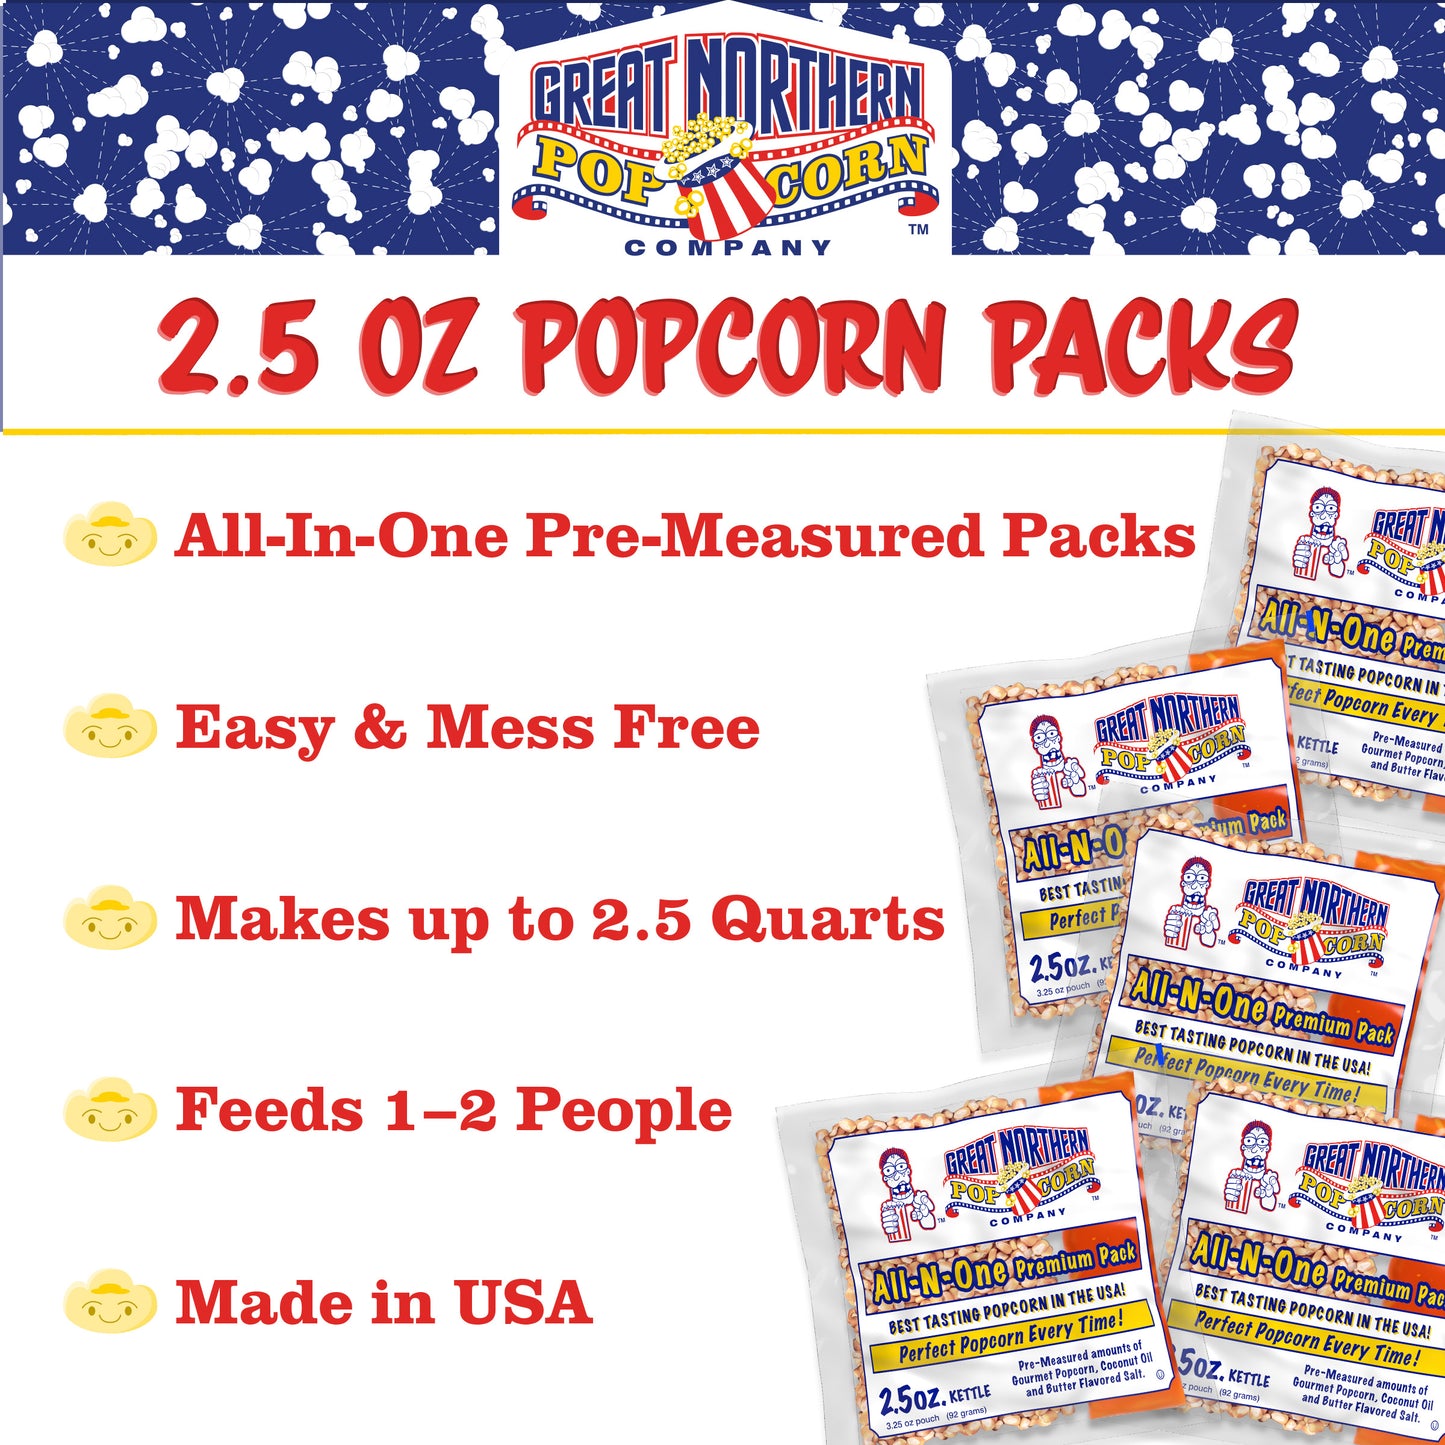 Pop Pup Popcorn Machine with 2.5-Ounce Kettle and 12 All-in-One Popcorn Packs - Red